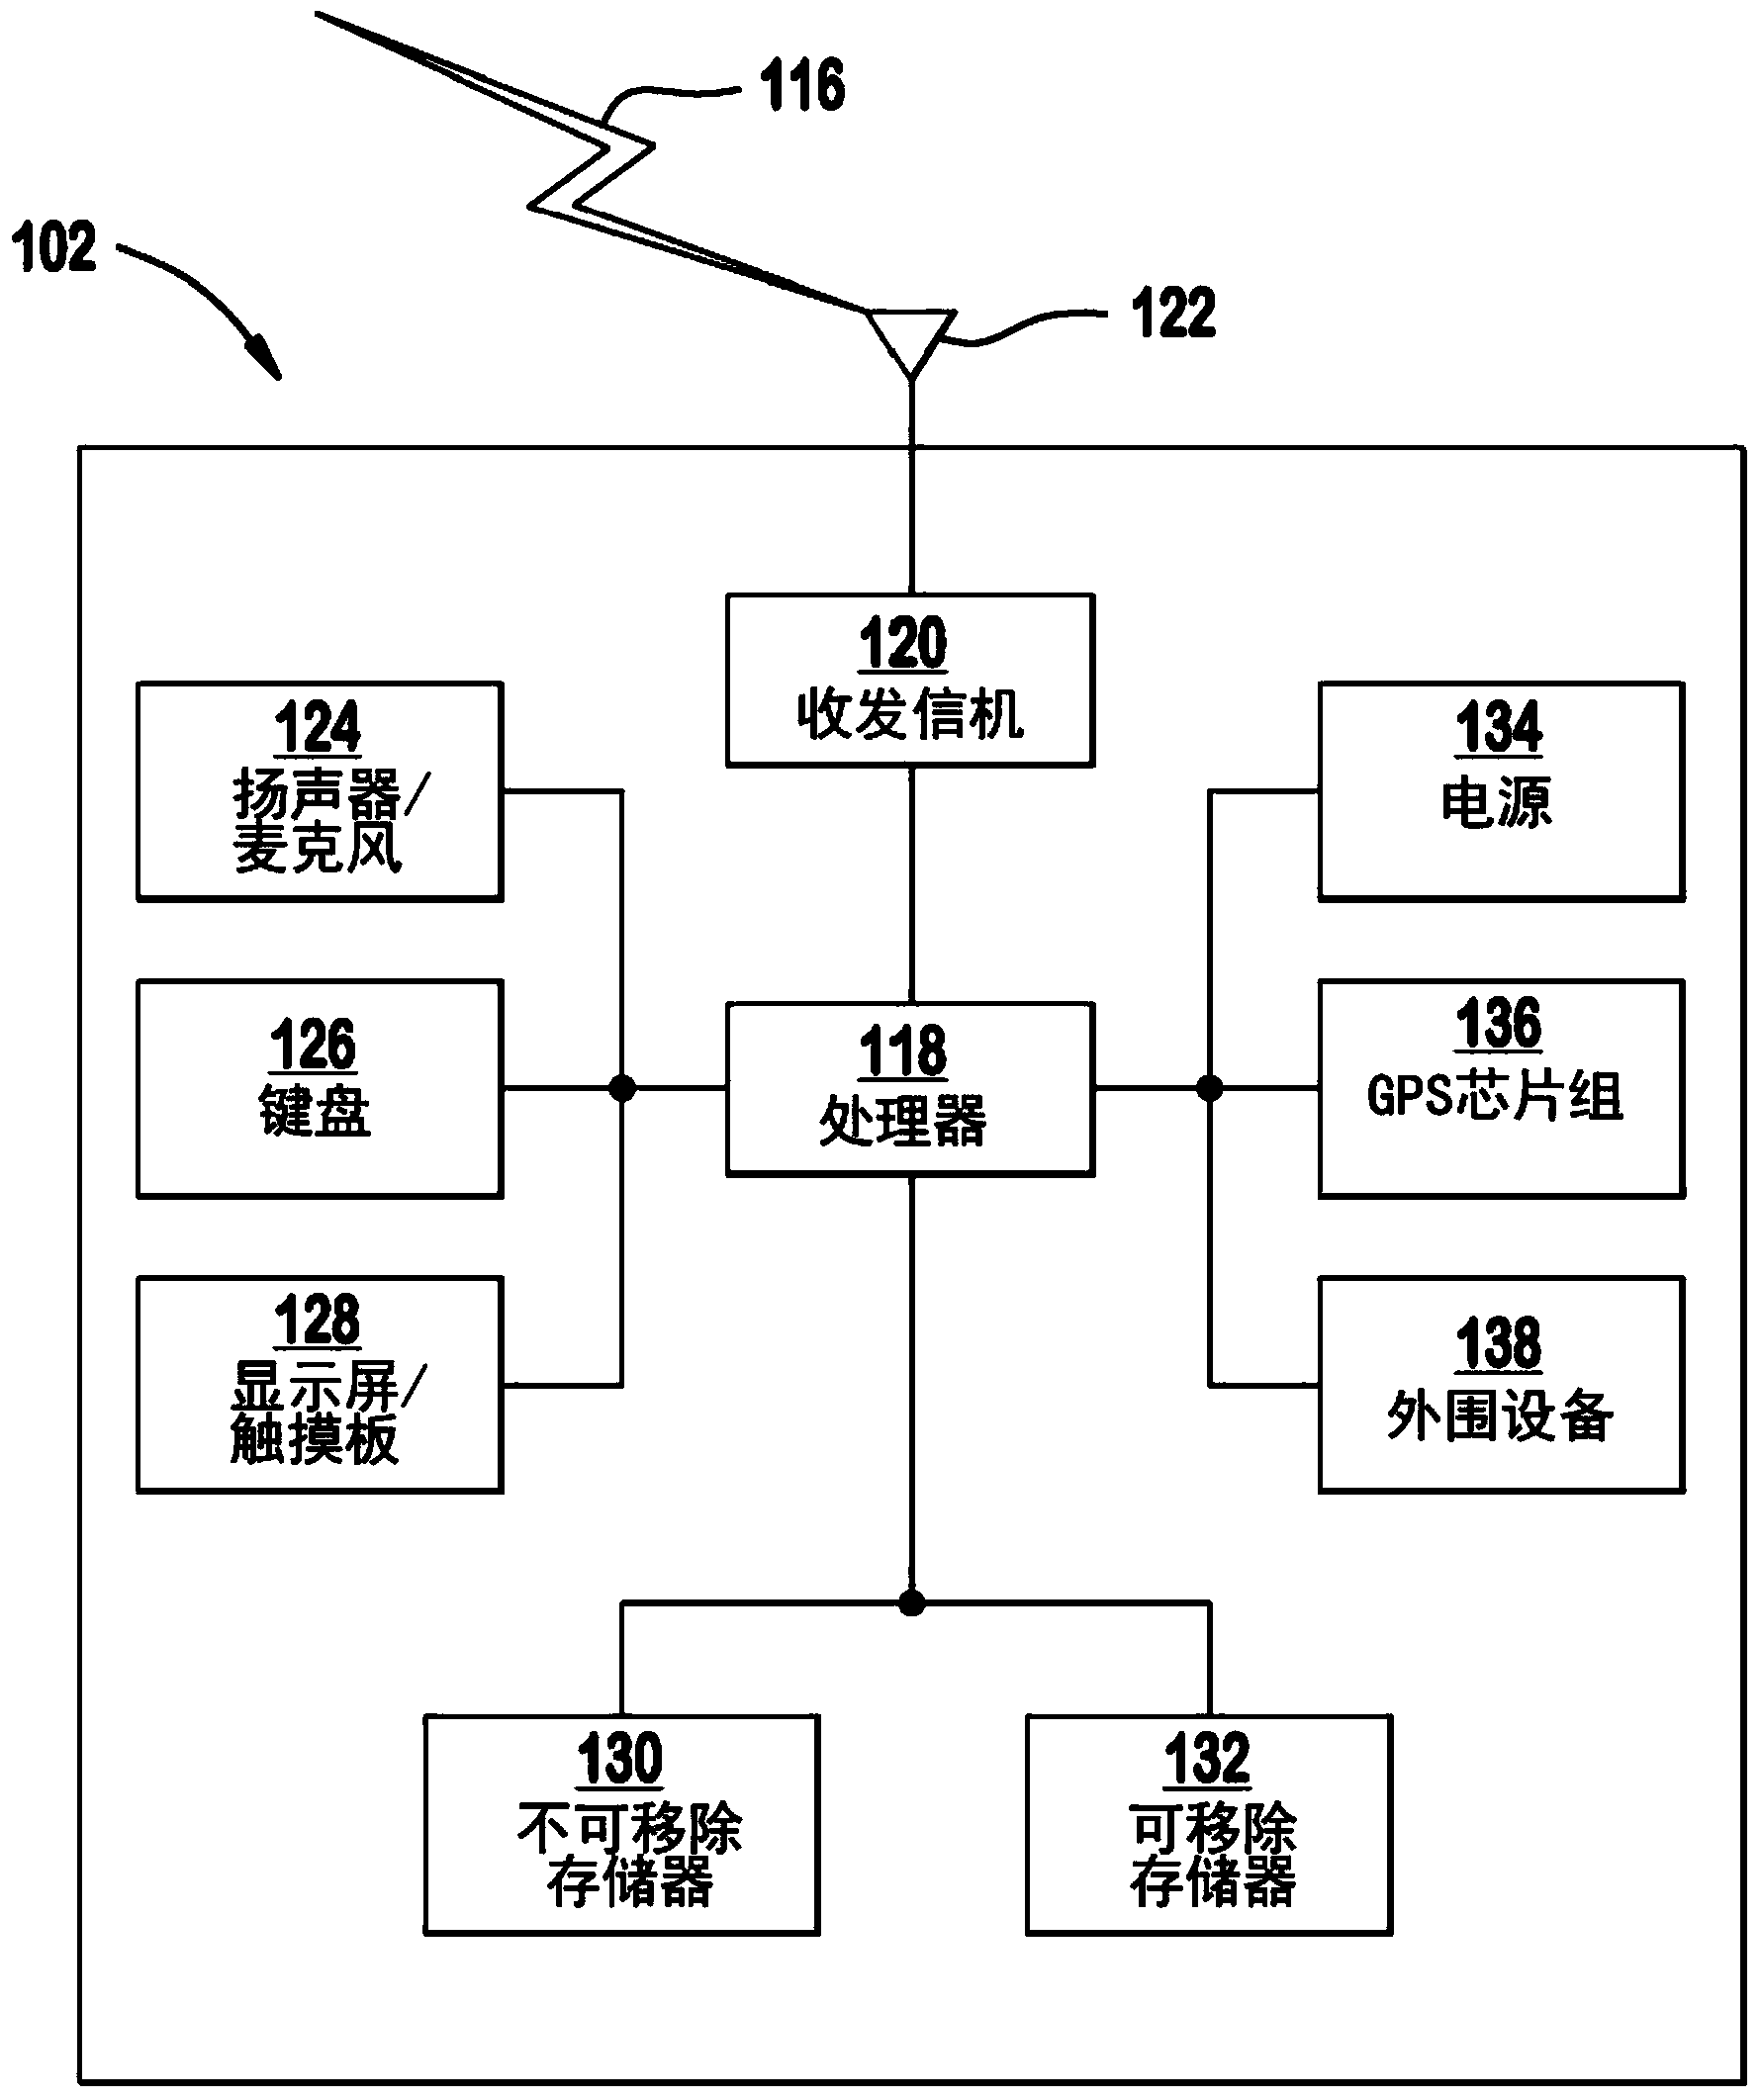 Method and apparatus for multi-rat access mode operation